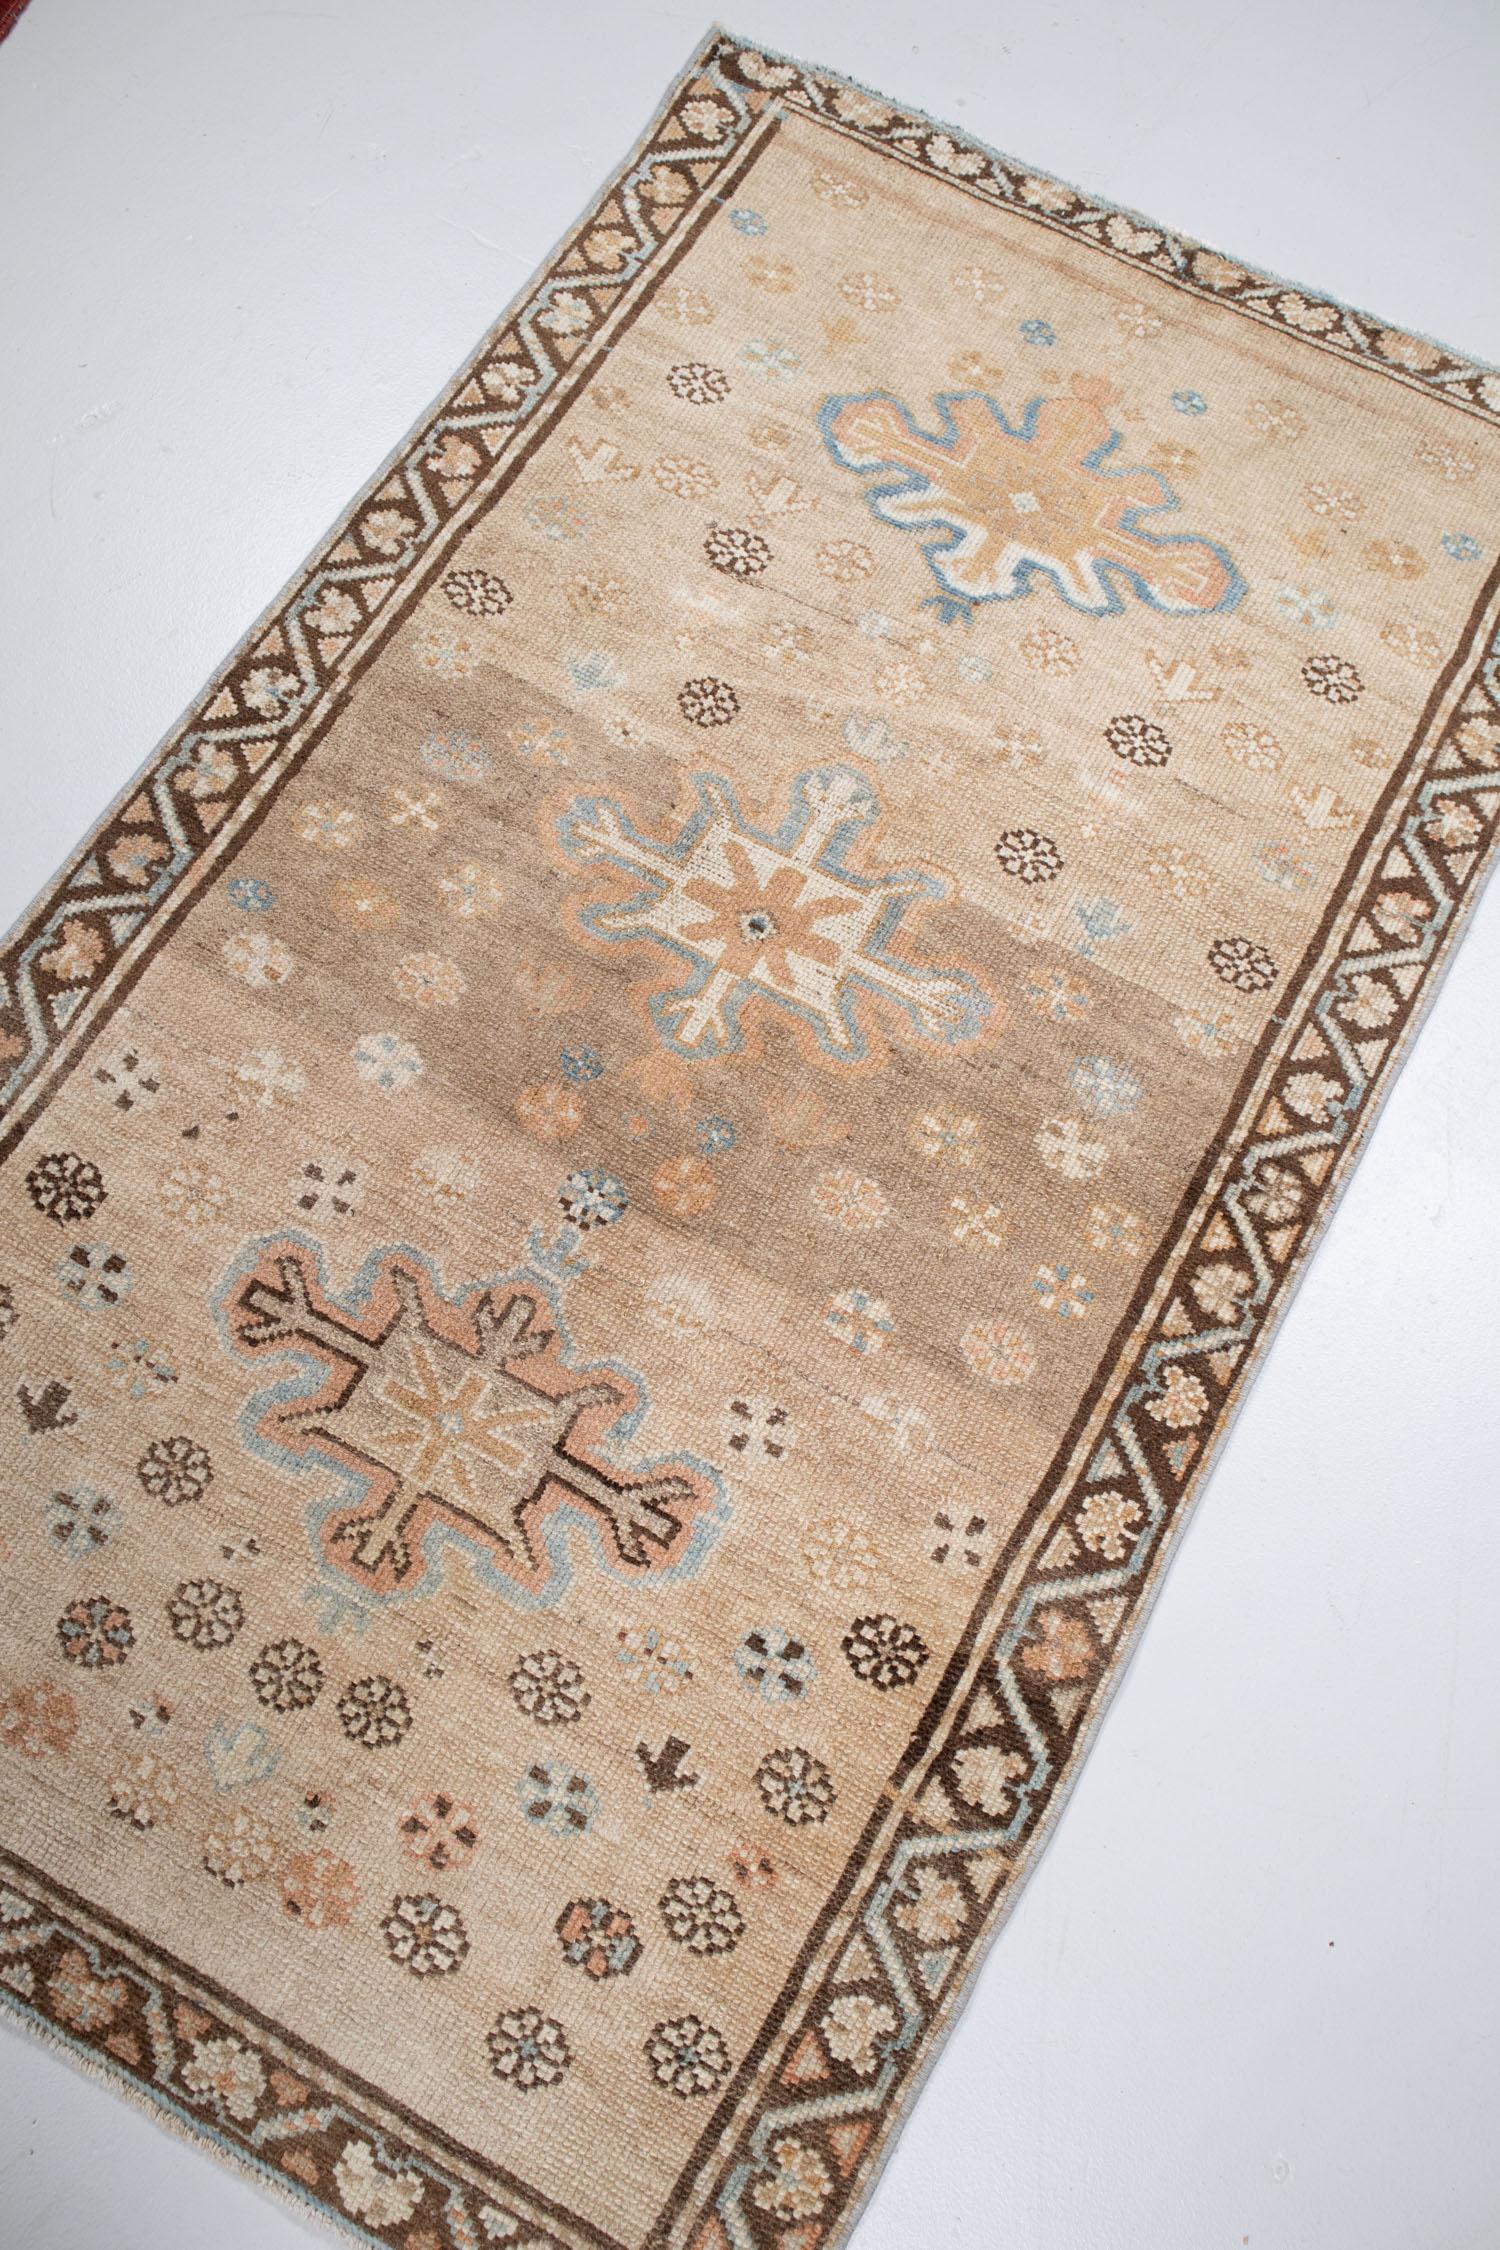 Hand-Knotted Antique Camel Hair Sarab Rug S-R5541 For Sale